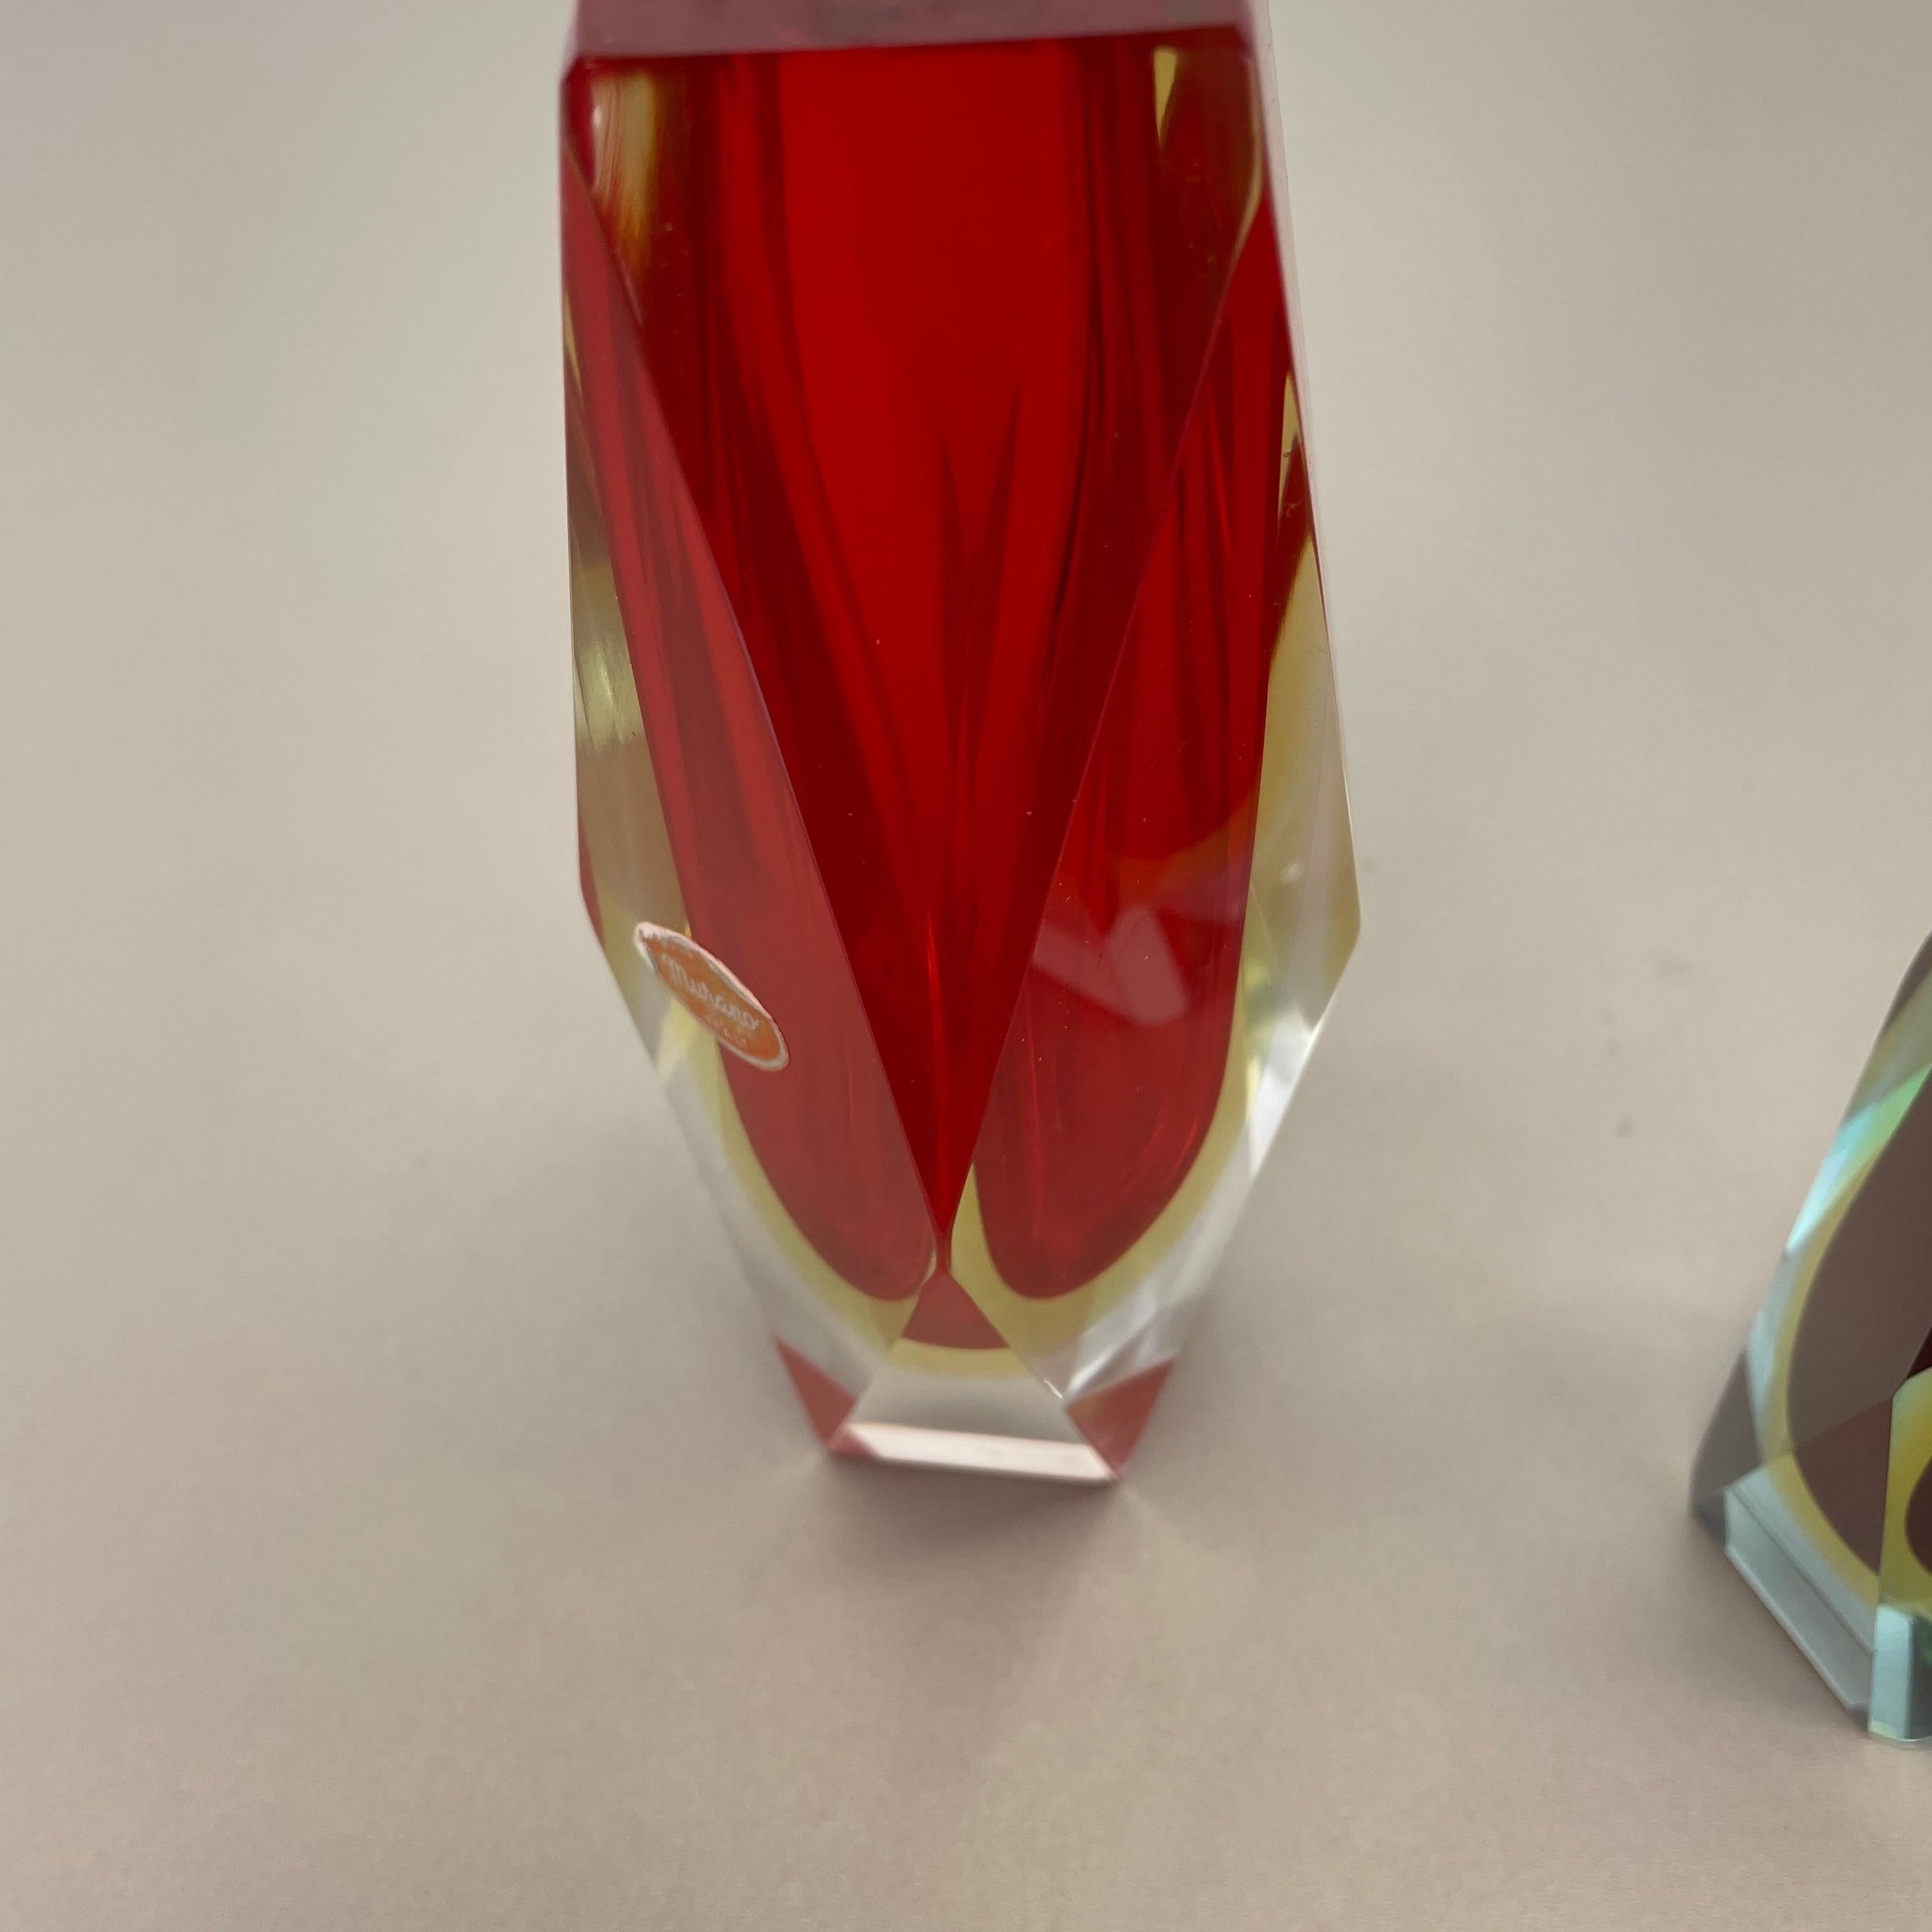 Set of 2 Faceted Murano Glass Sommerso Vase Designed by Flavio Poli Italy, 1970s For Sale 3